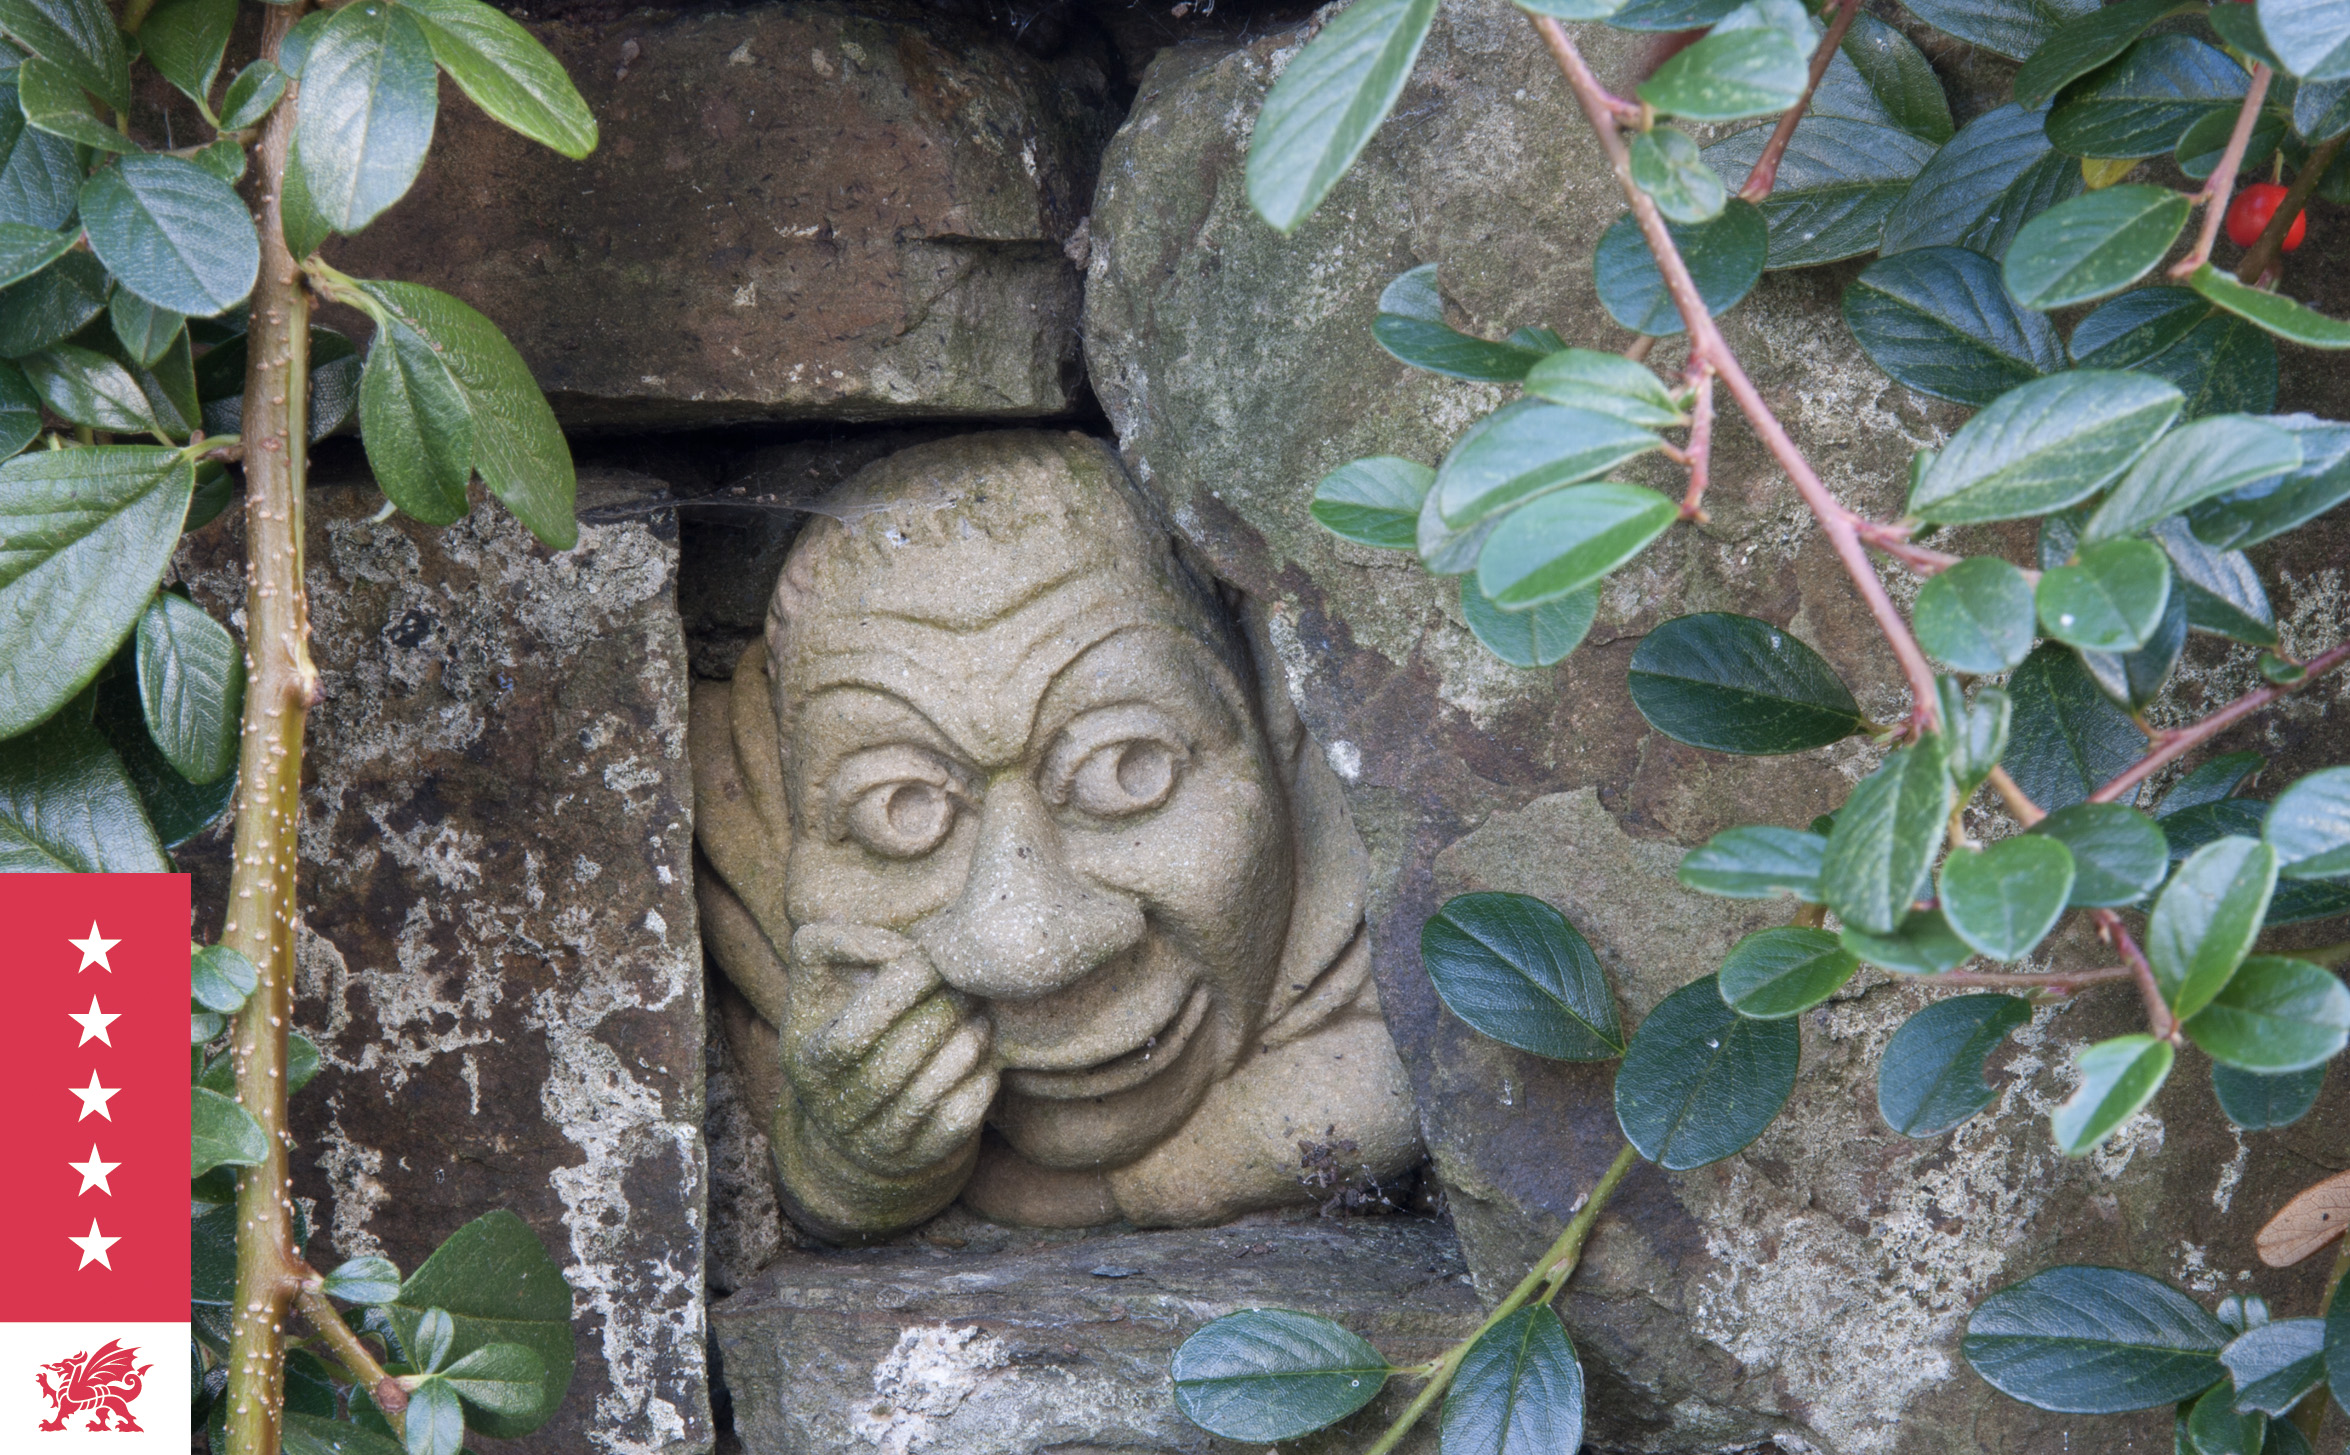 Fairview - The Bogeyman - hiding in one of the garden walls